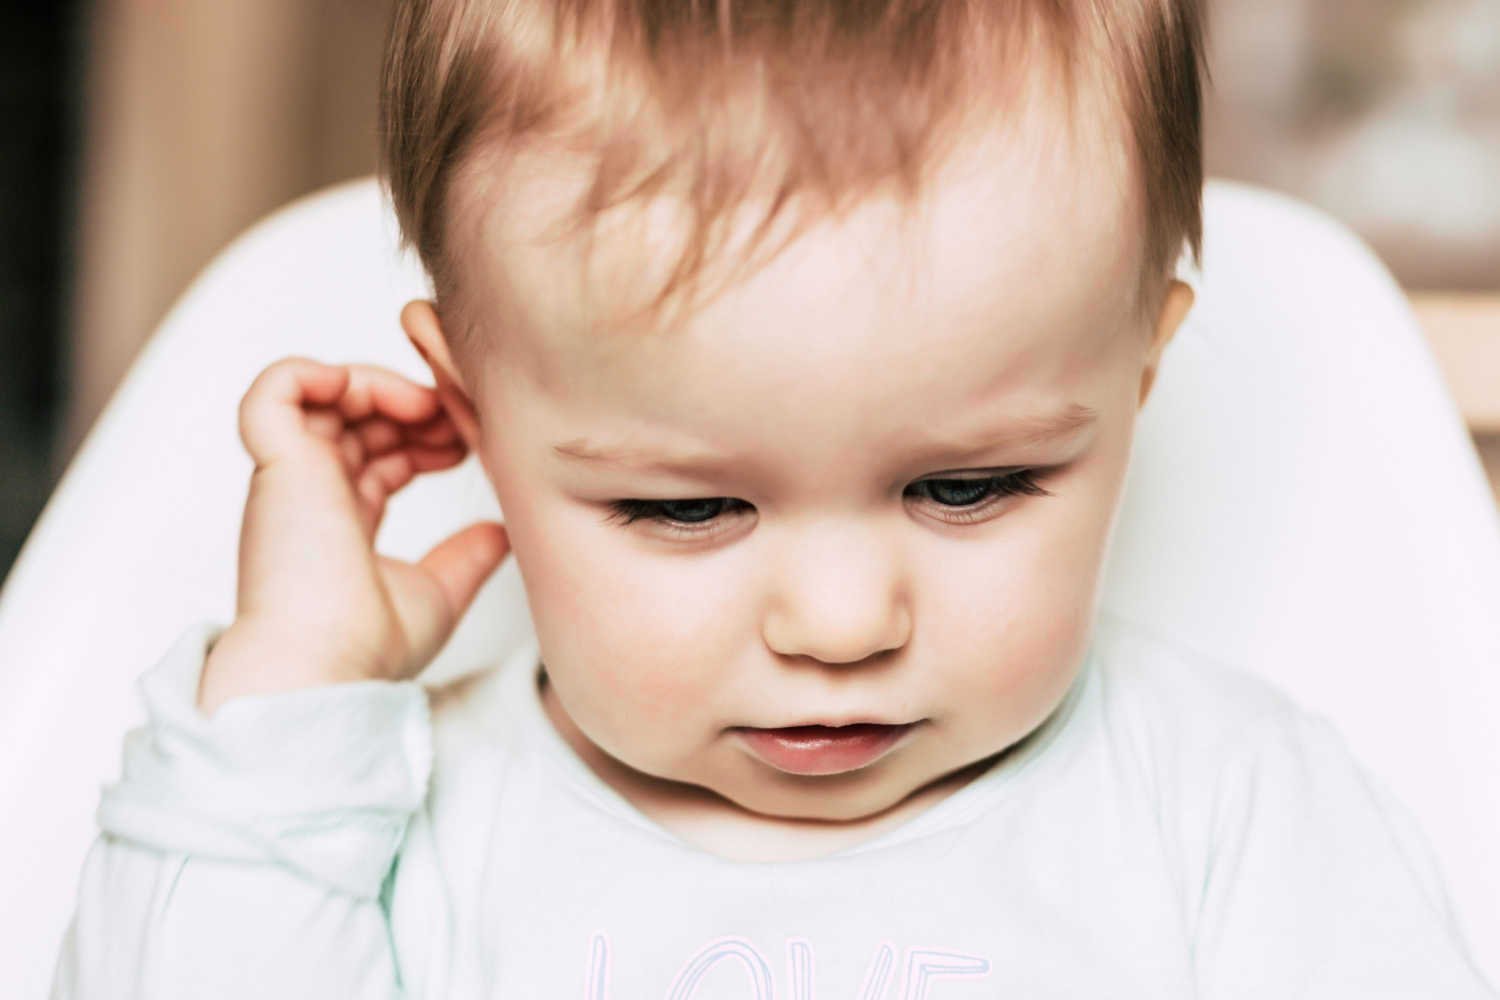 Causes For Babies Pulling Ears